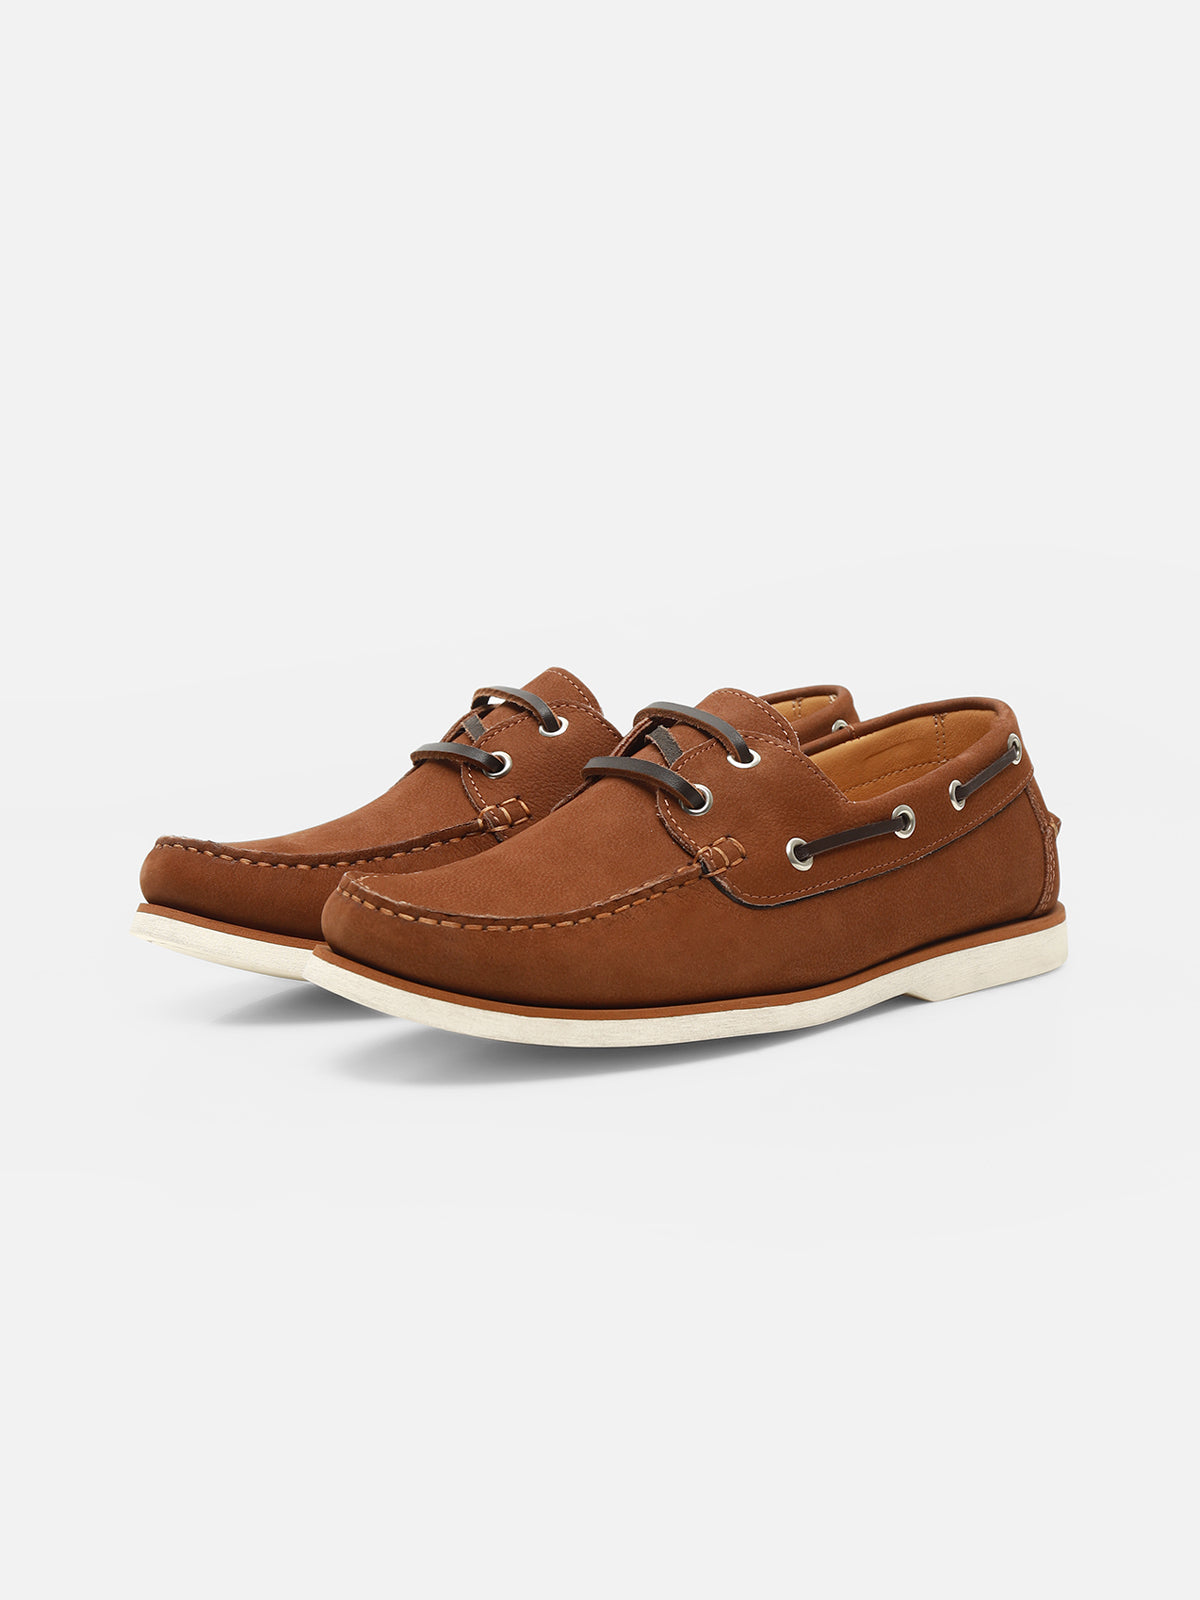 Leather Boat Shoe - FAMS24-043